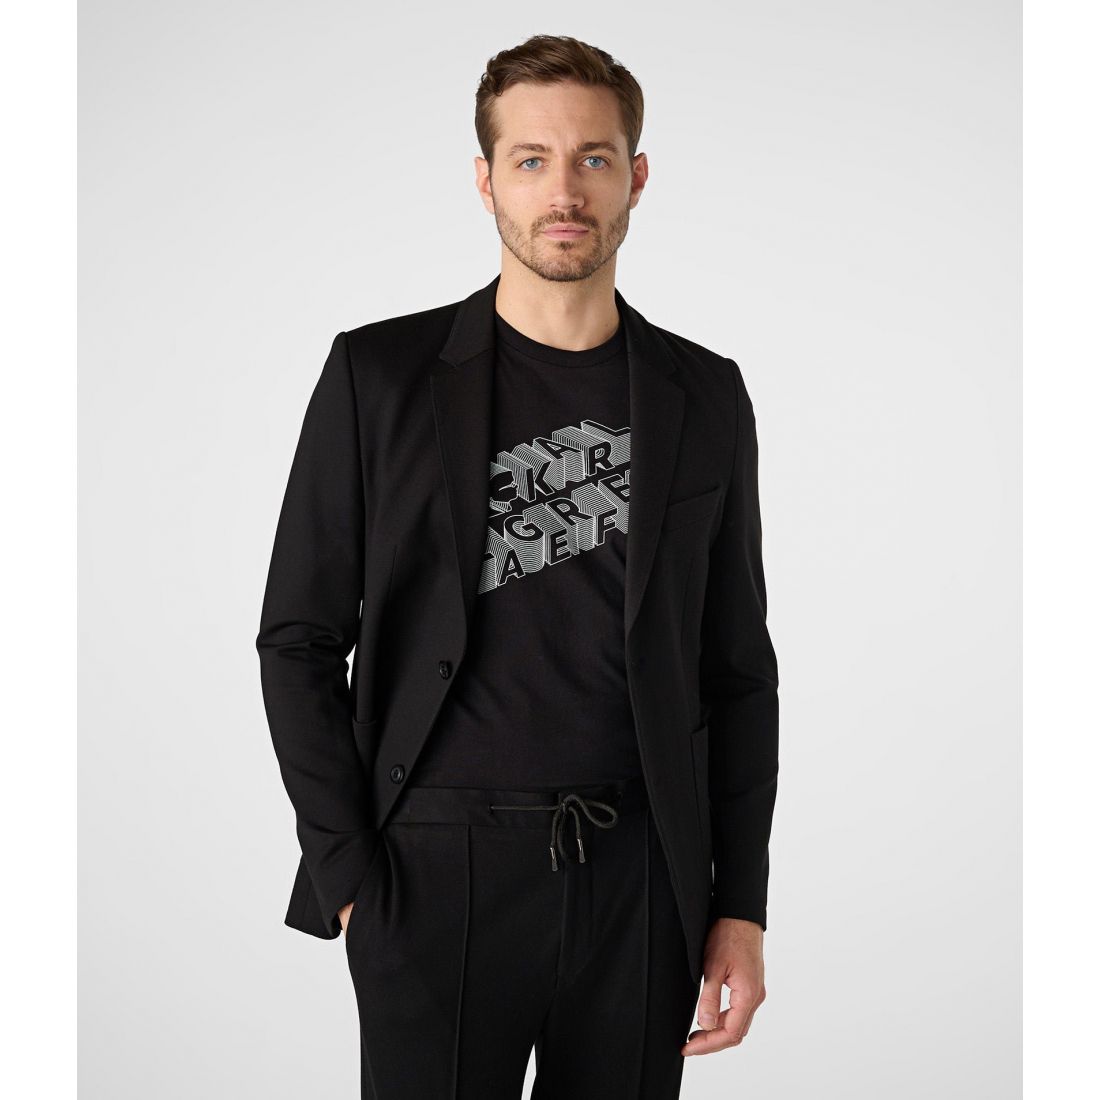 Karl Lagerfeld - Blazer 'Casual' pour Hommes